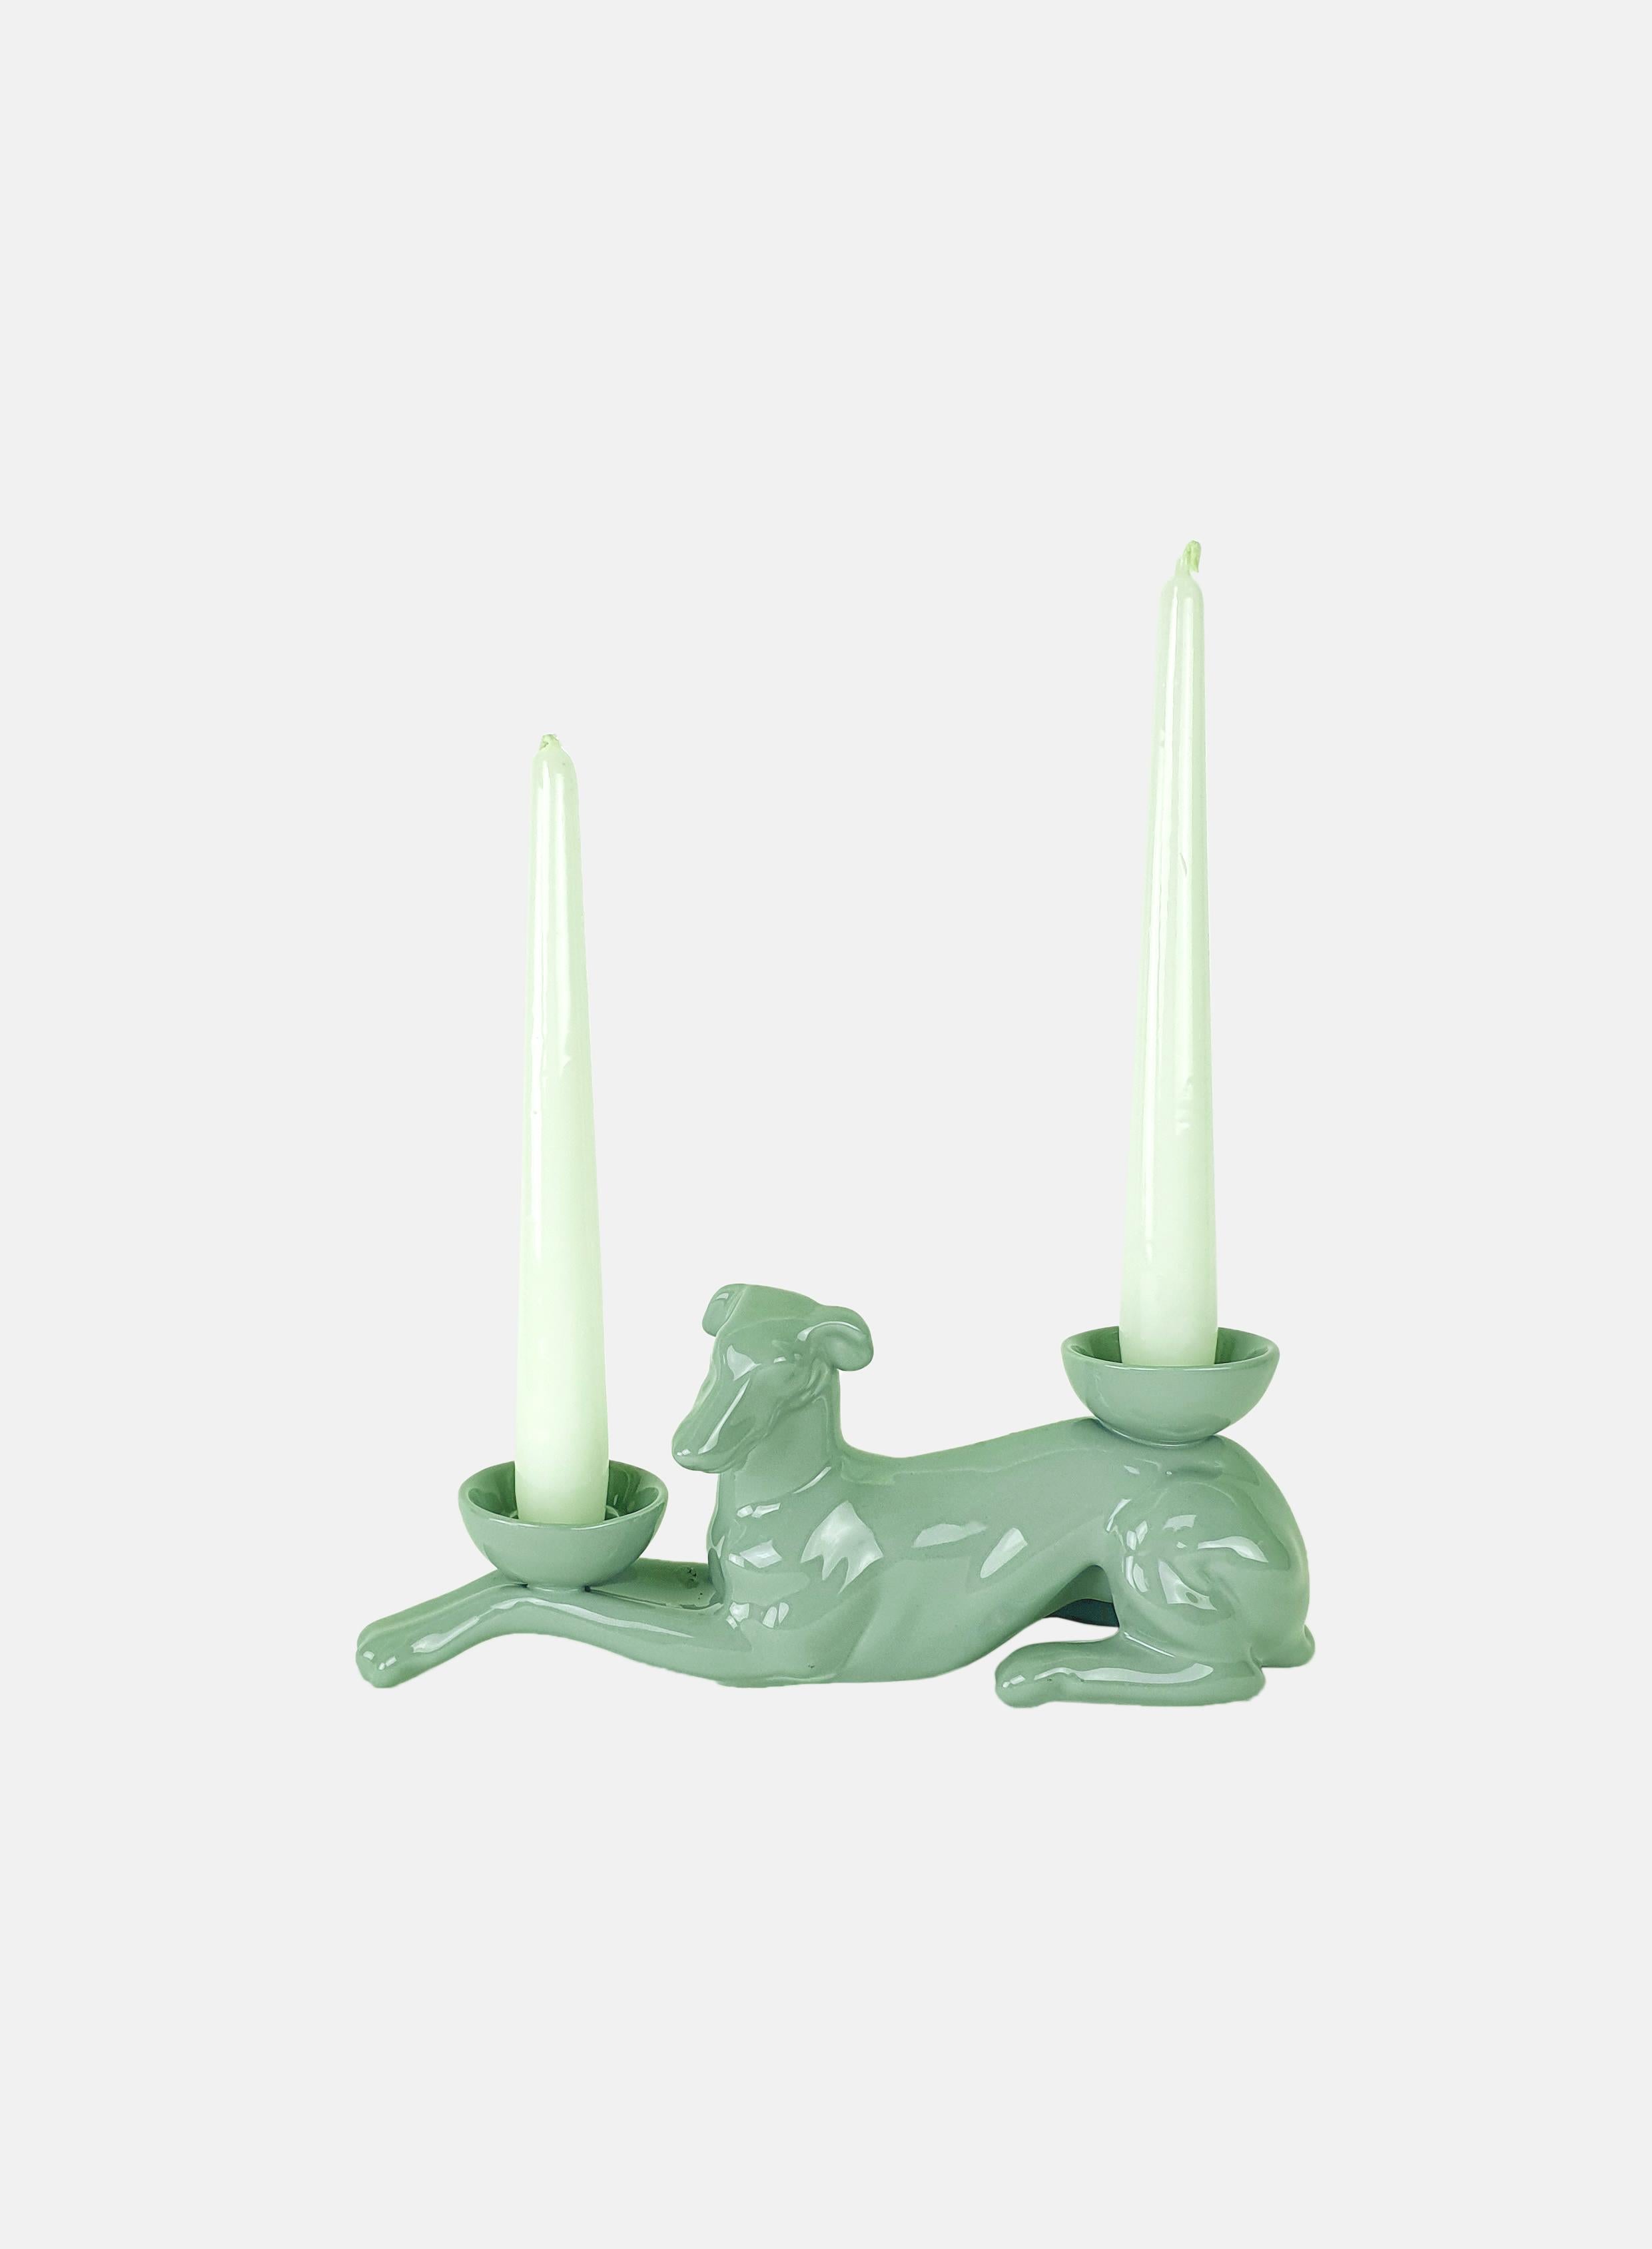 This greyhound is part of an original collection of candle holder animals. The realization of the shape takes place through a mold with liquid clay; tiled and hand painted in a vast range of colours, from the most delicate pastels to the more